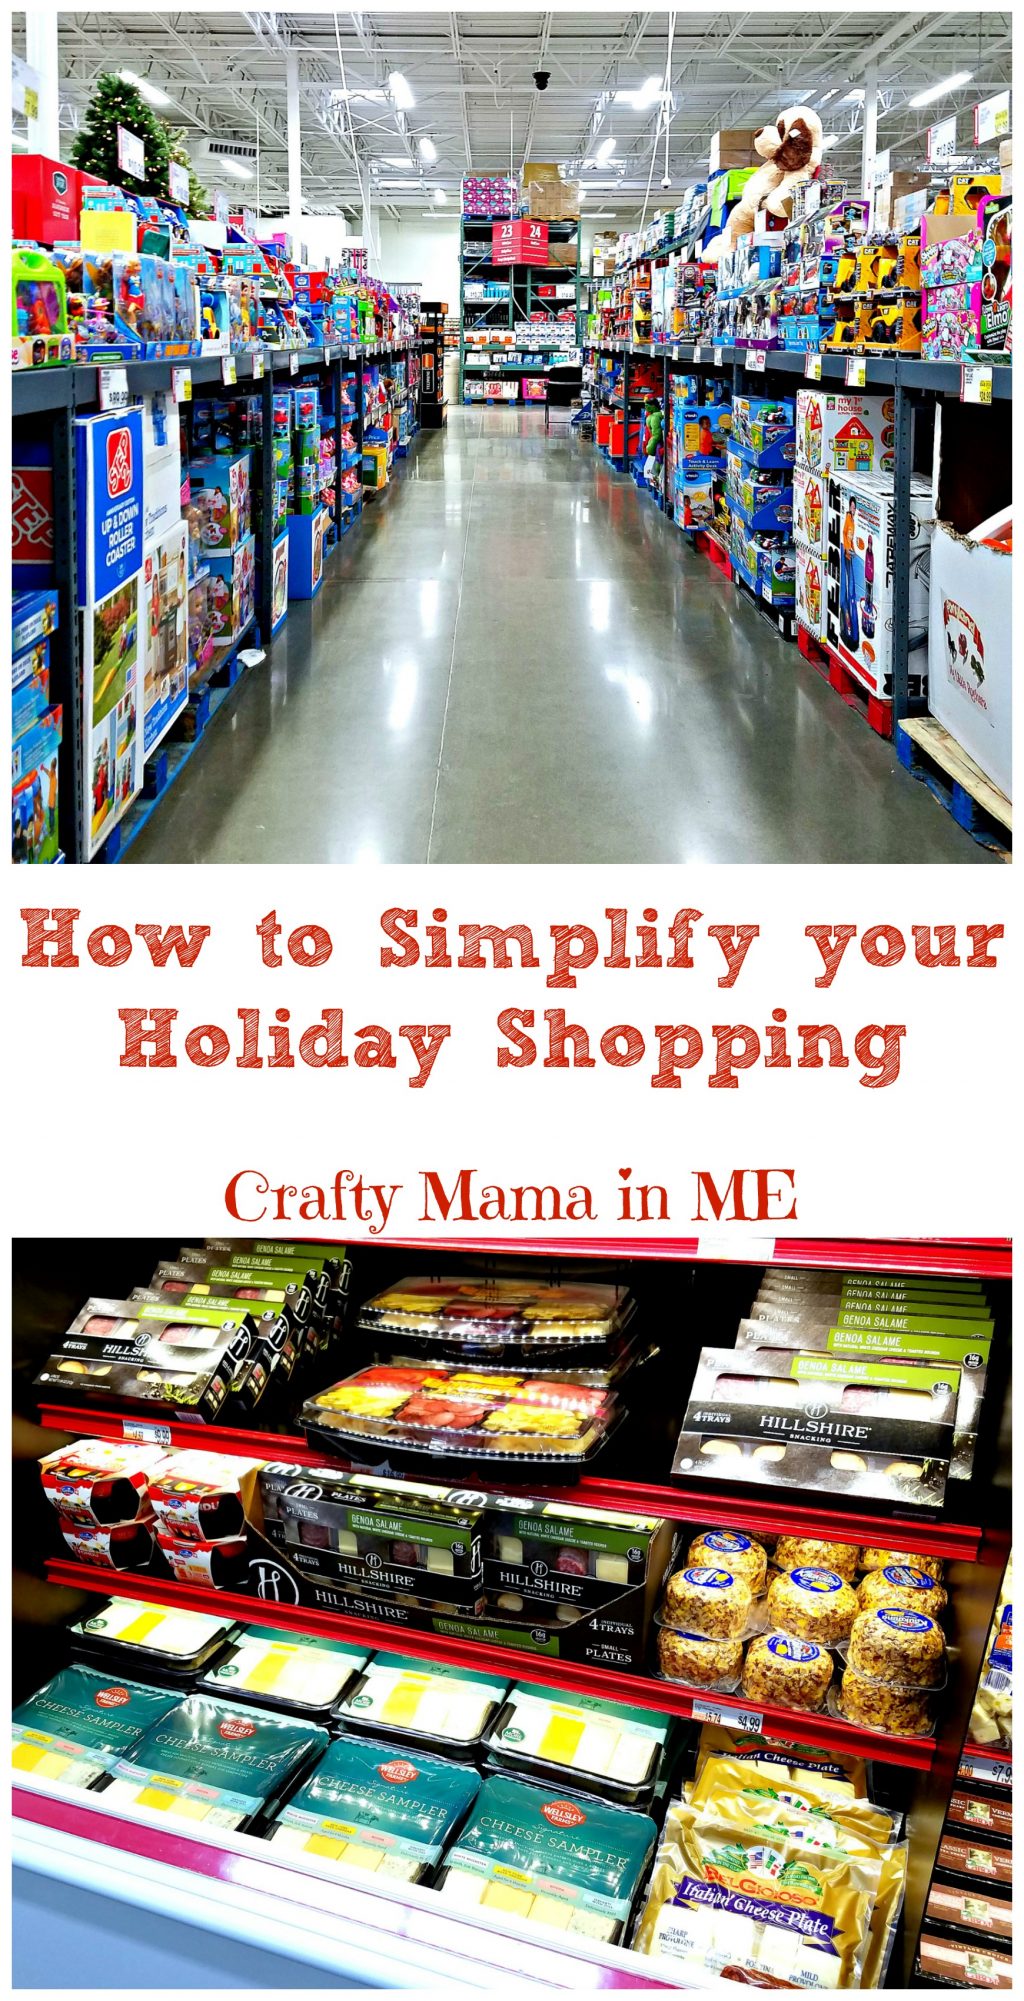 How to Simplify your Holiday Shopping